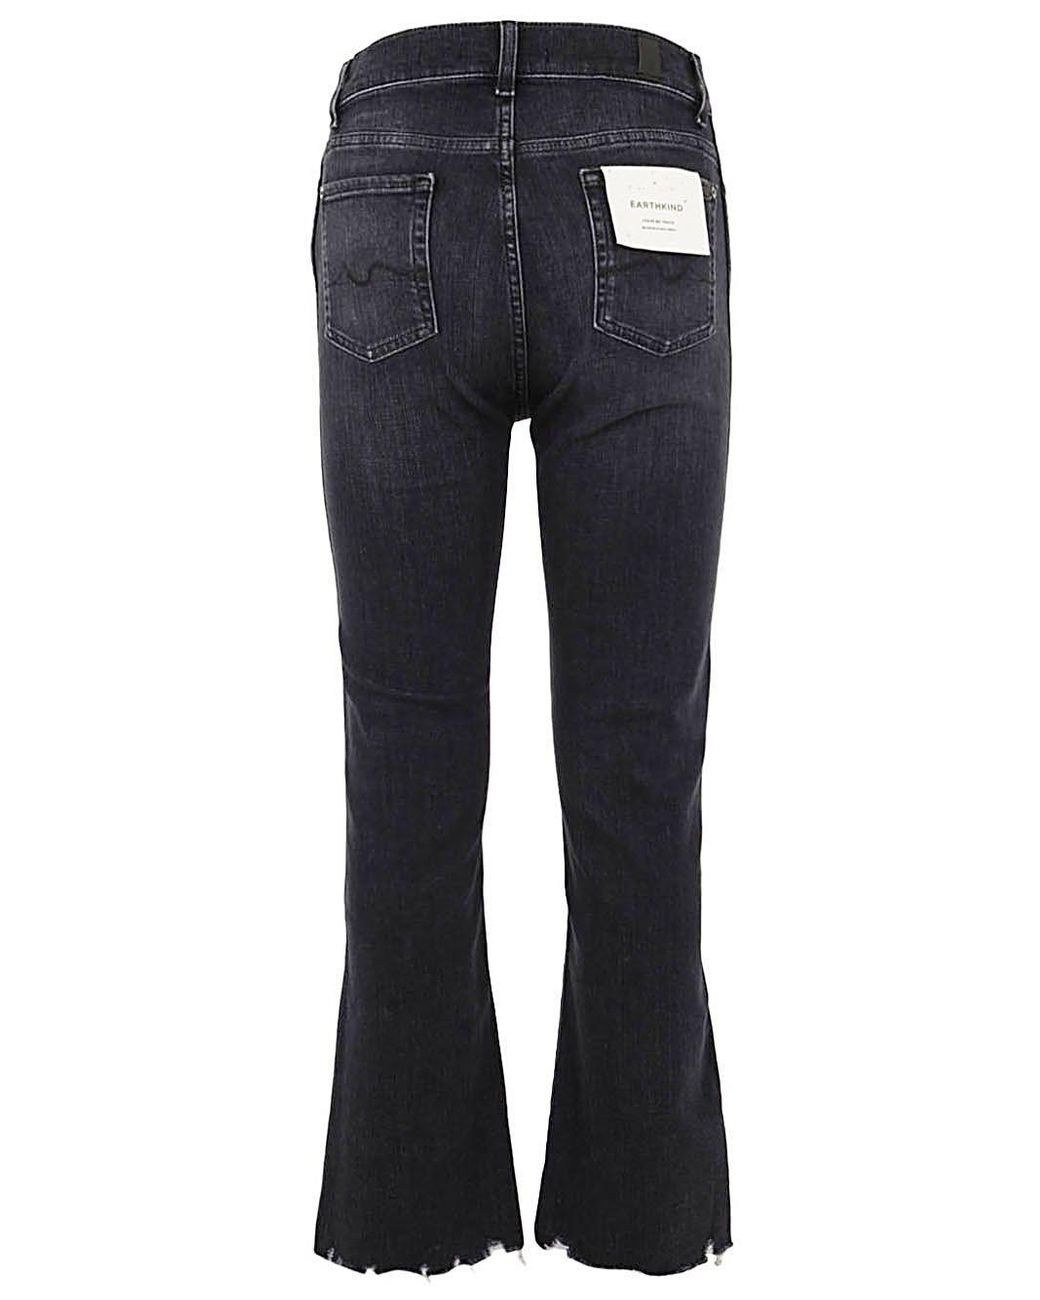 Damen Jeans 7 For All Mankind Jeans 7 For All Mankind Andere materialien jeans in Blau 